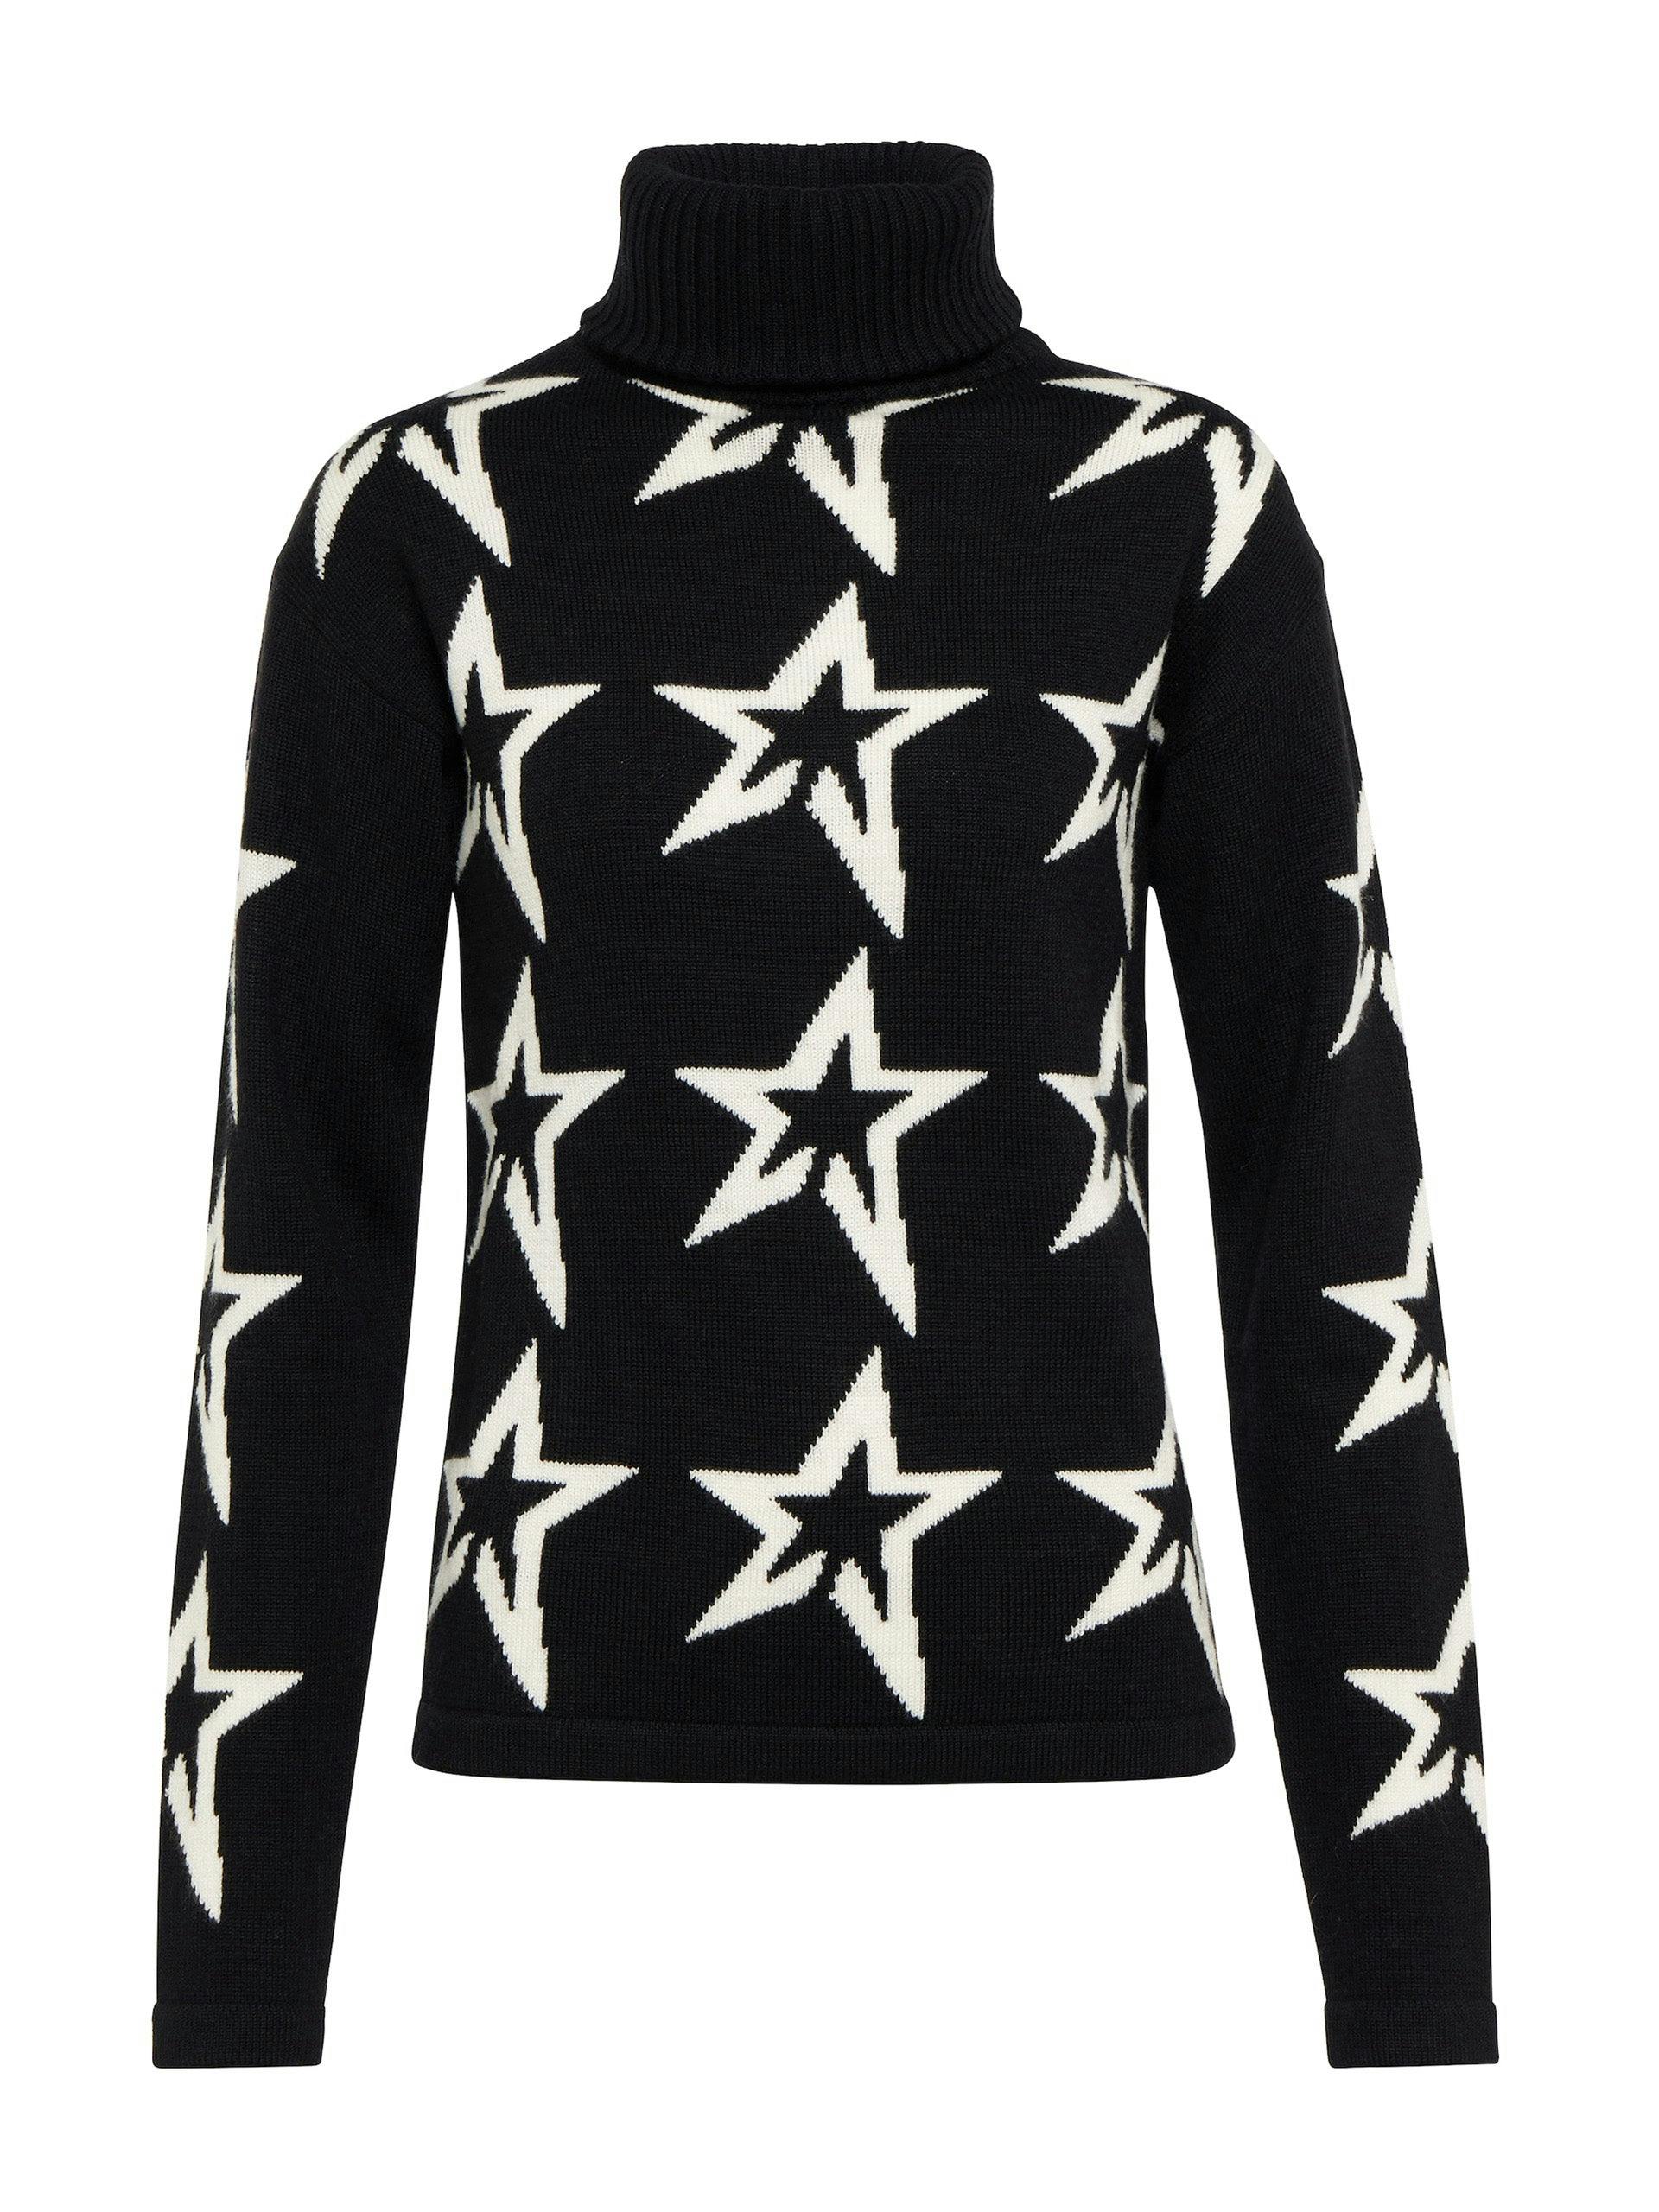 Star patterned knitted roll-neck jumper